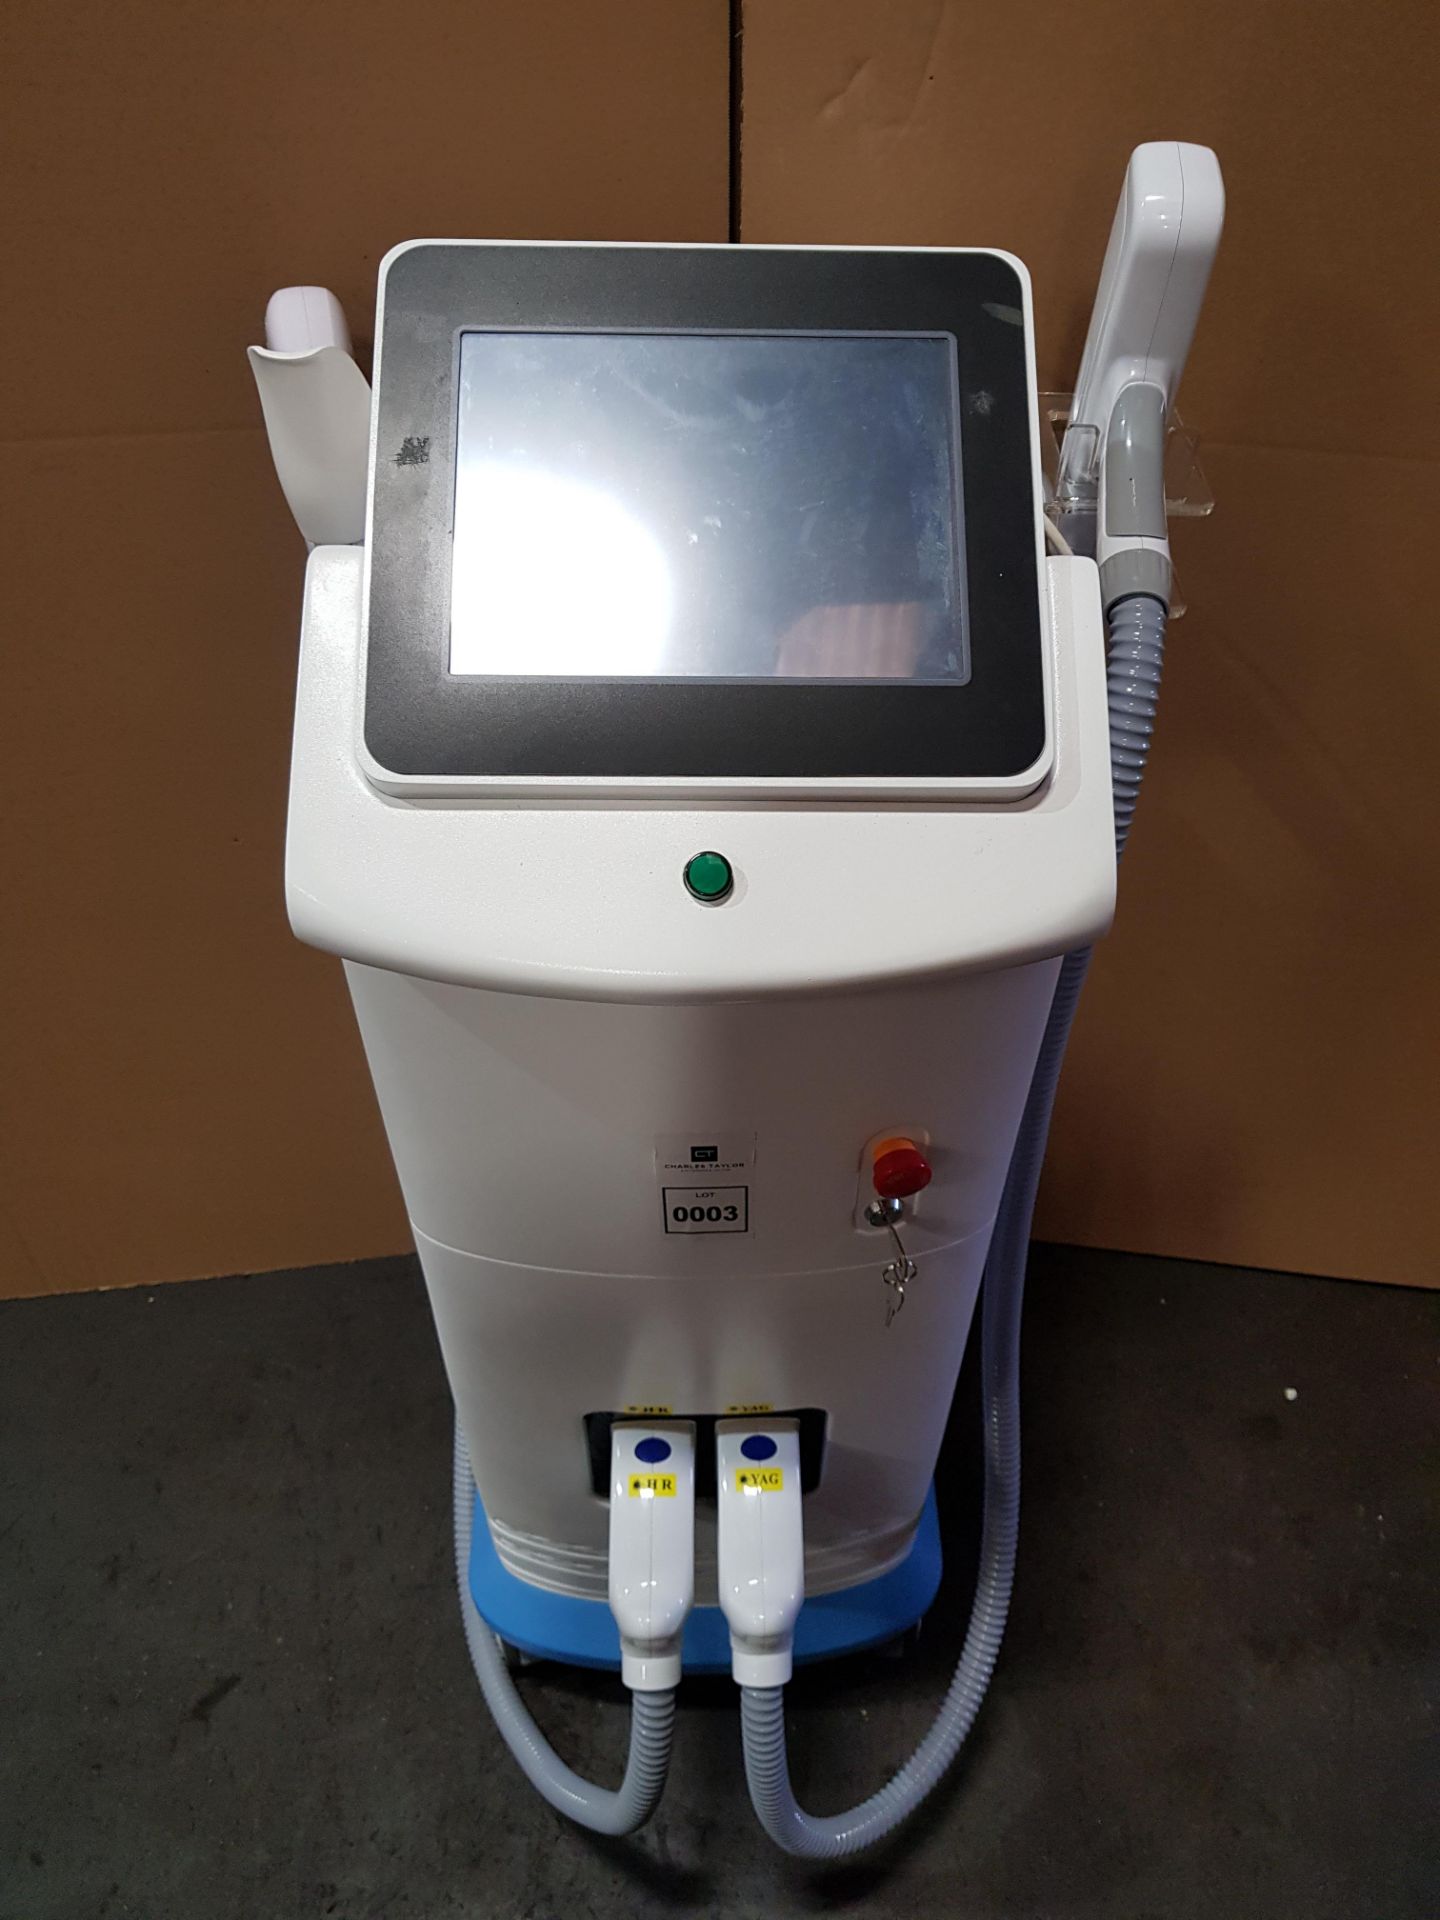 PROFESSIONAL HR SUPER HAIR REMOVAL ND YAG - LASER MACHINE (NO PLATE) (WITH 2 HAND GUNS, POWER LEAD &